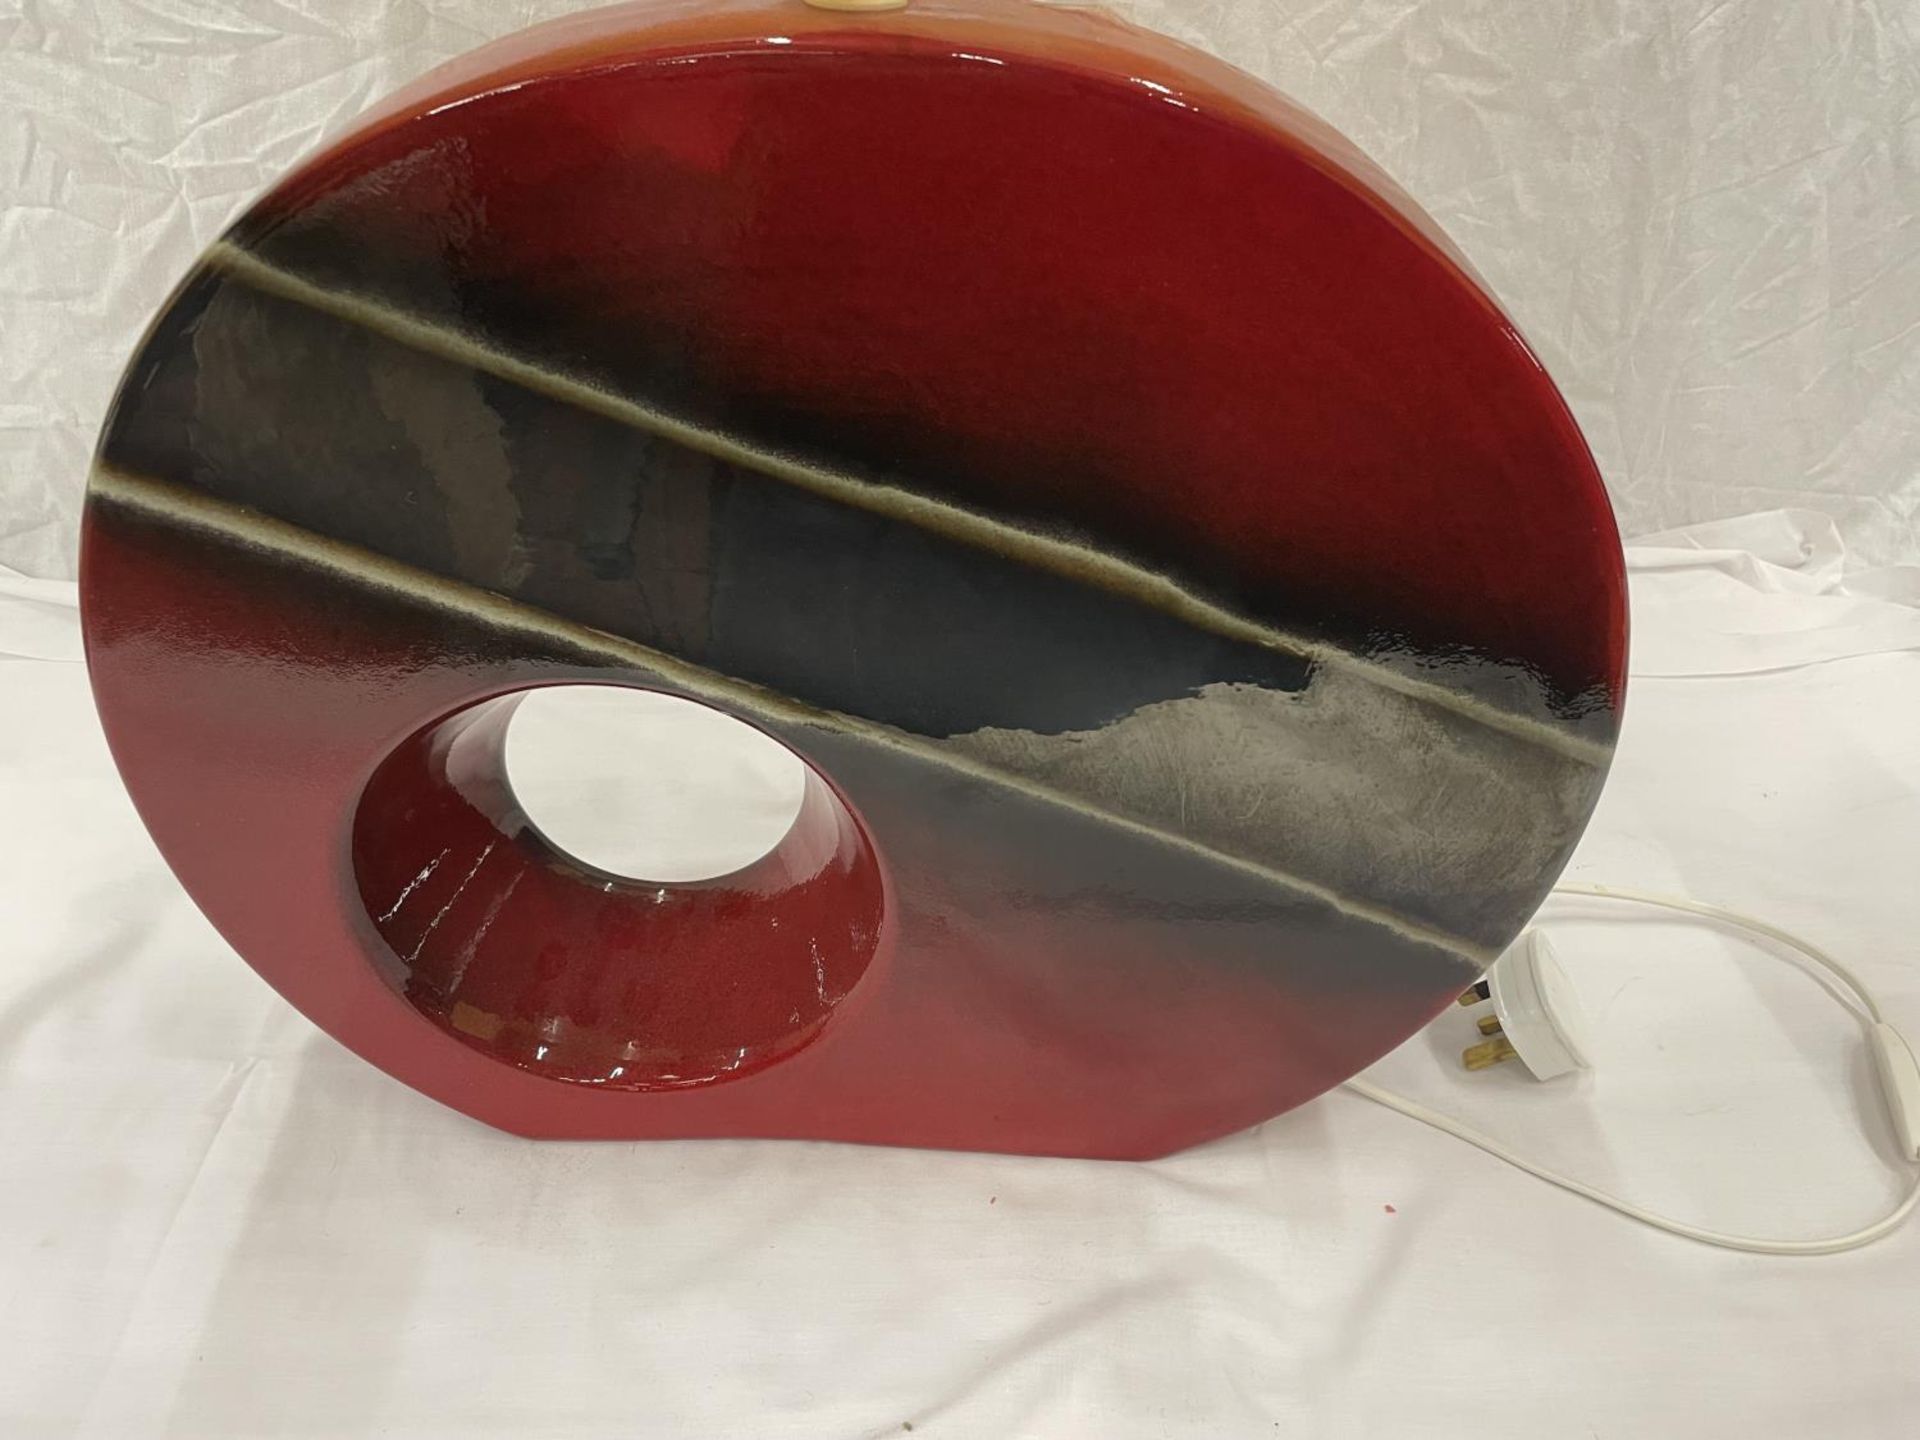 A VERY LARGE ART SCULPTURE ROUND RED LAMP WITH SHADE HEIGHT 40CM, WIDTH 47CM - Image 3 of 6